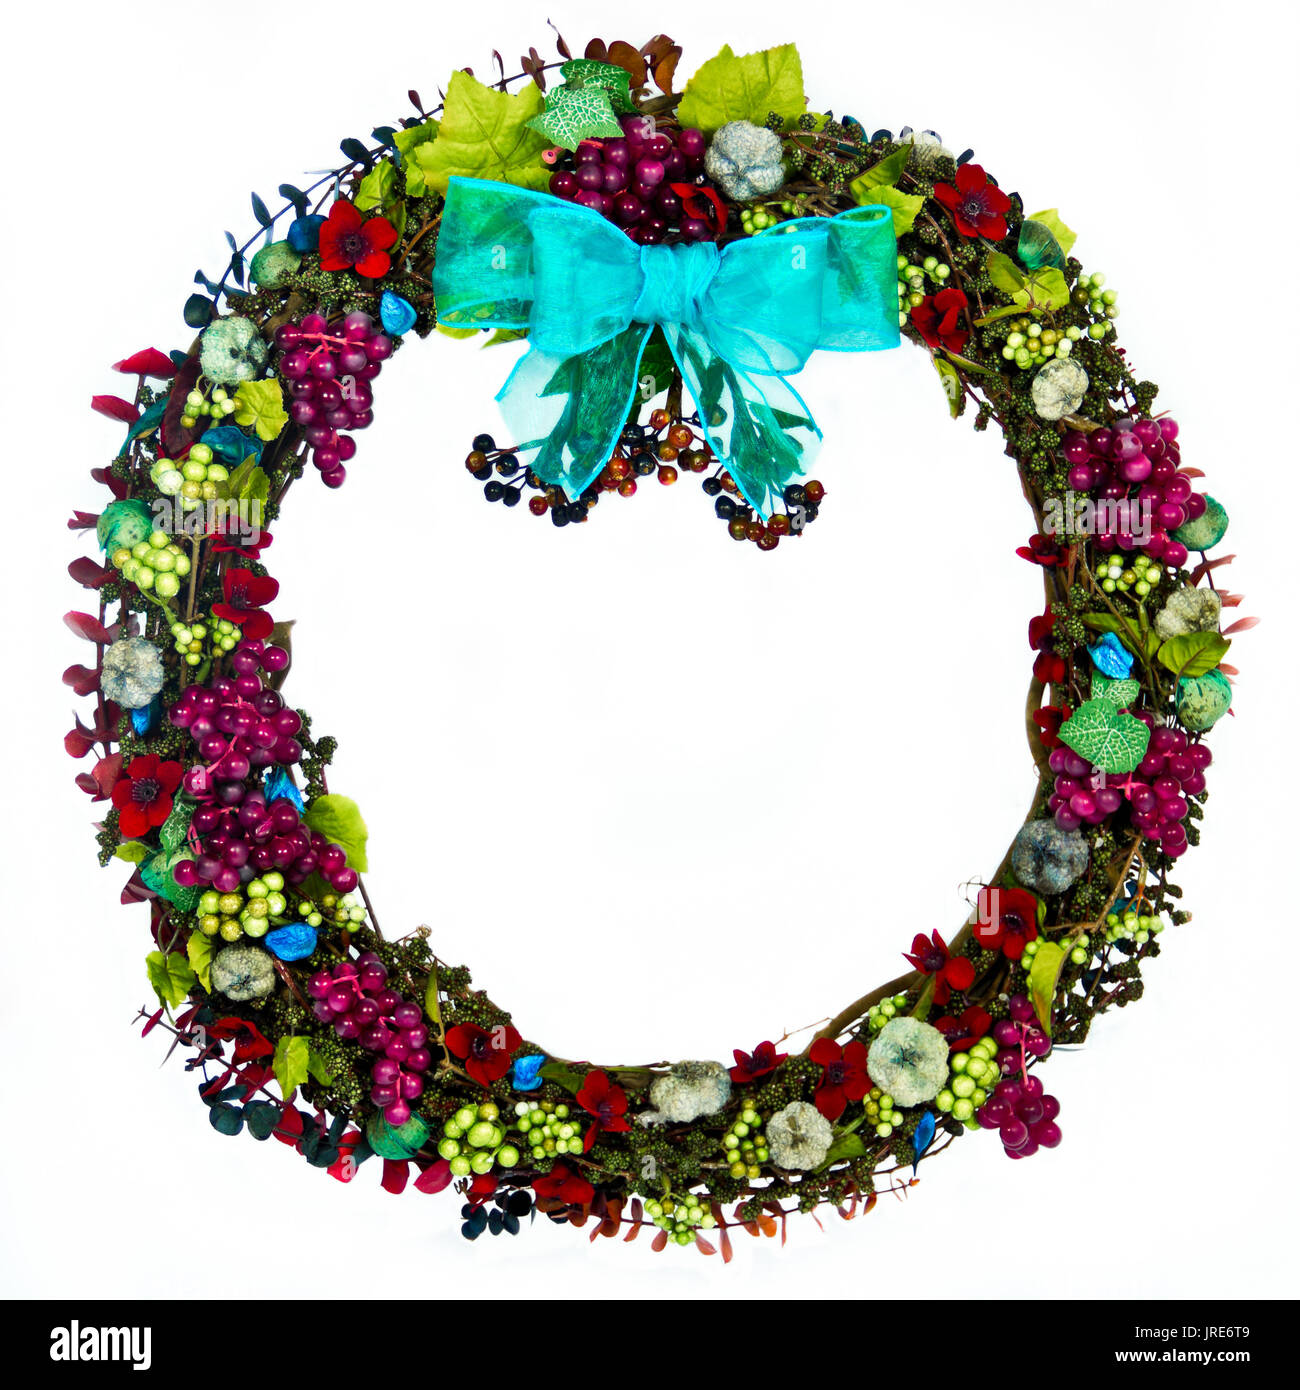 The decorations on a natural grapevine wreath are the colors of burgandy, pale  green, blue-green, blue-gray and dark blue and feature grapes, seeds,  Stock Photo